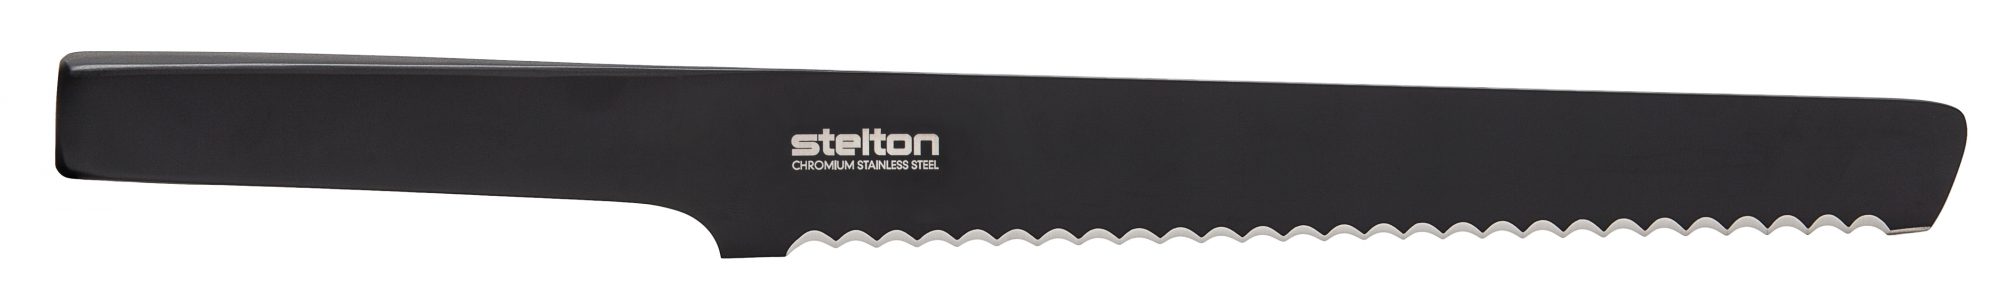 Pure Black bread knife by Stelton, $99, from 29 Armstrong.